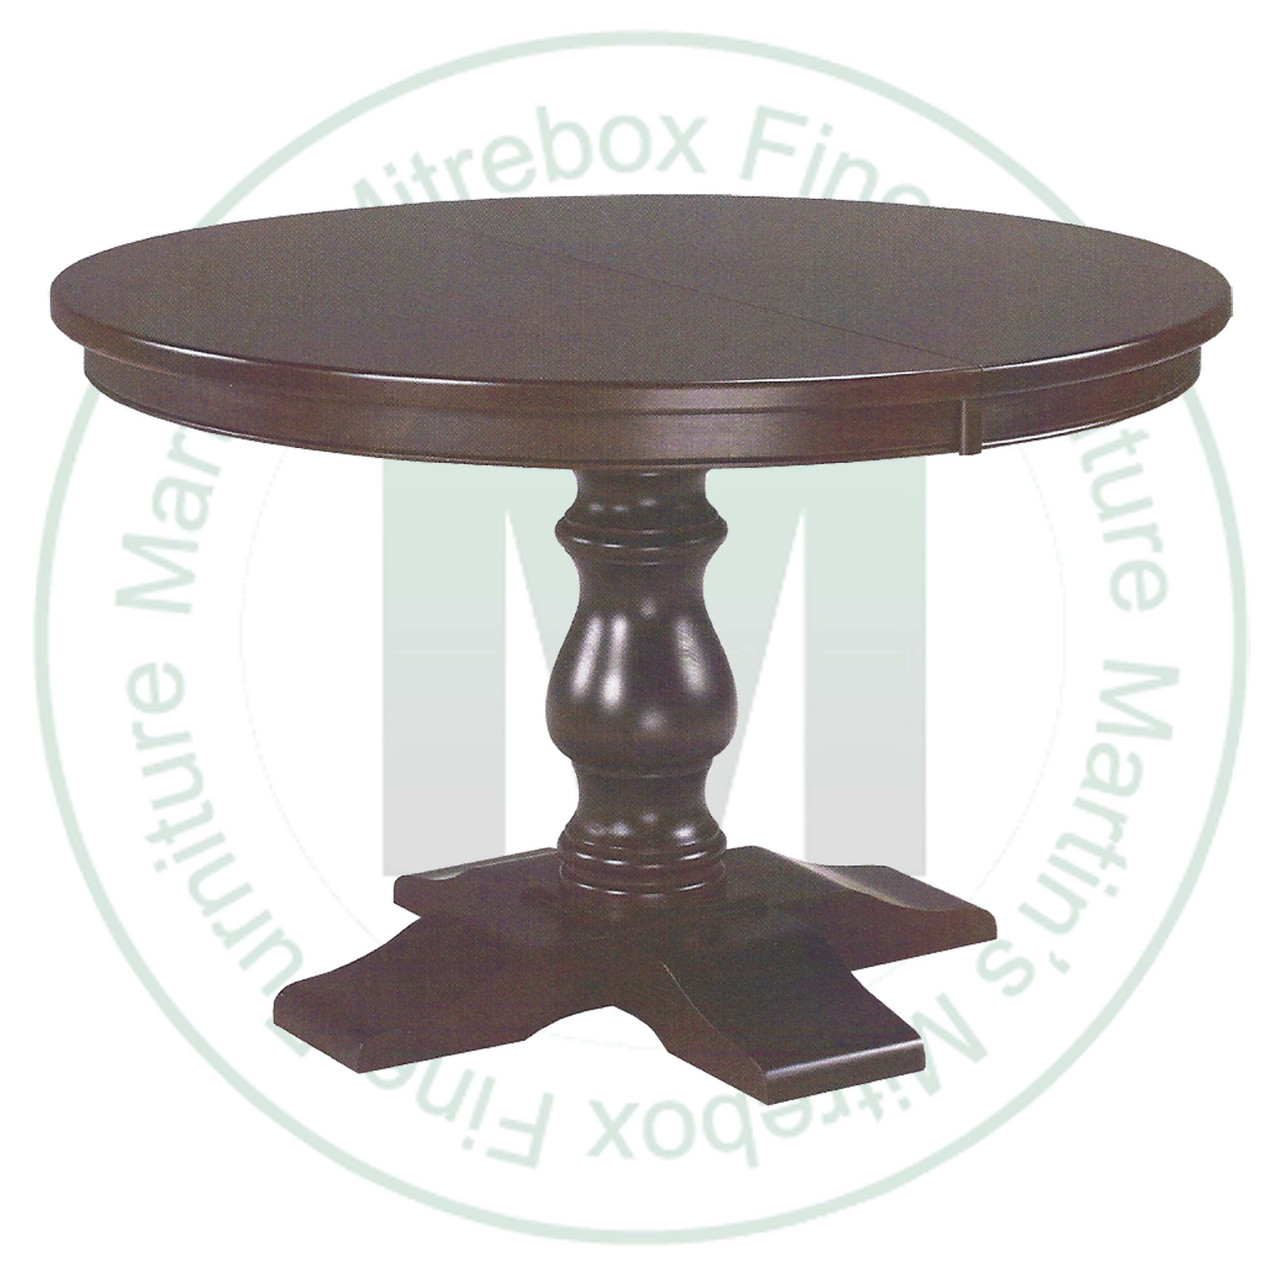 Wormy Maple Savannah Single Pedestal Table 48''D x 48''W x 30''H With 1 - 12'' Leaf Table. Table Has 1'' Thick Top.